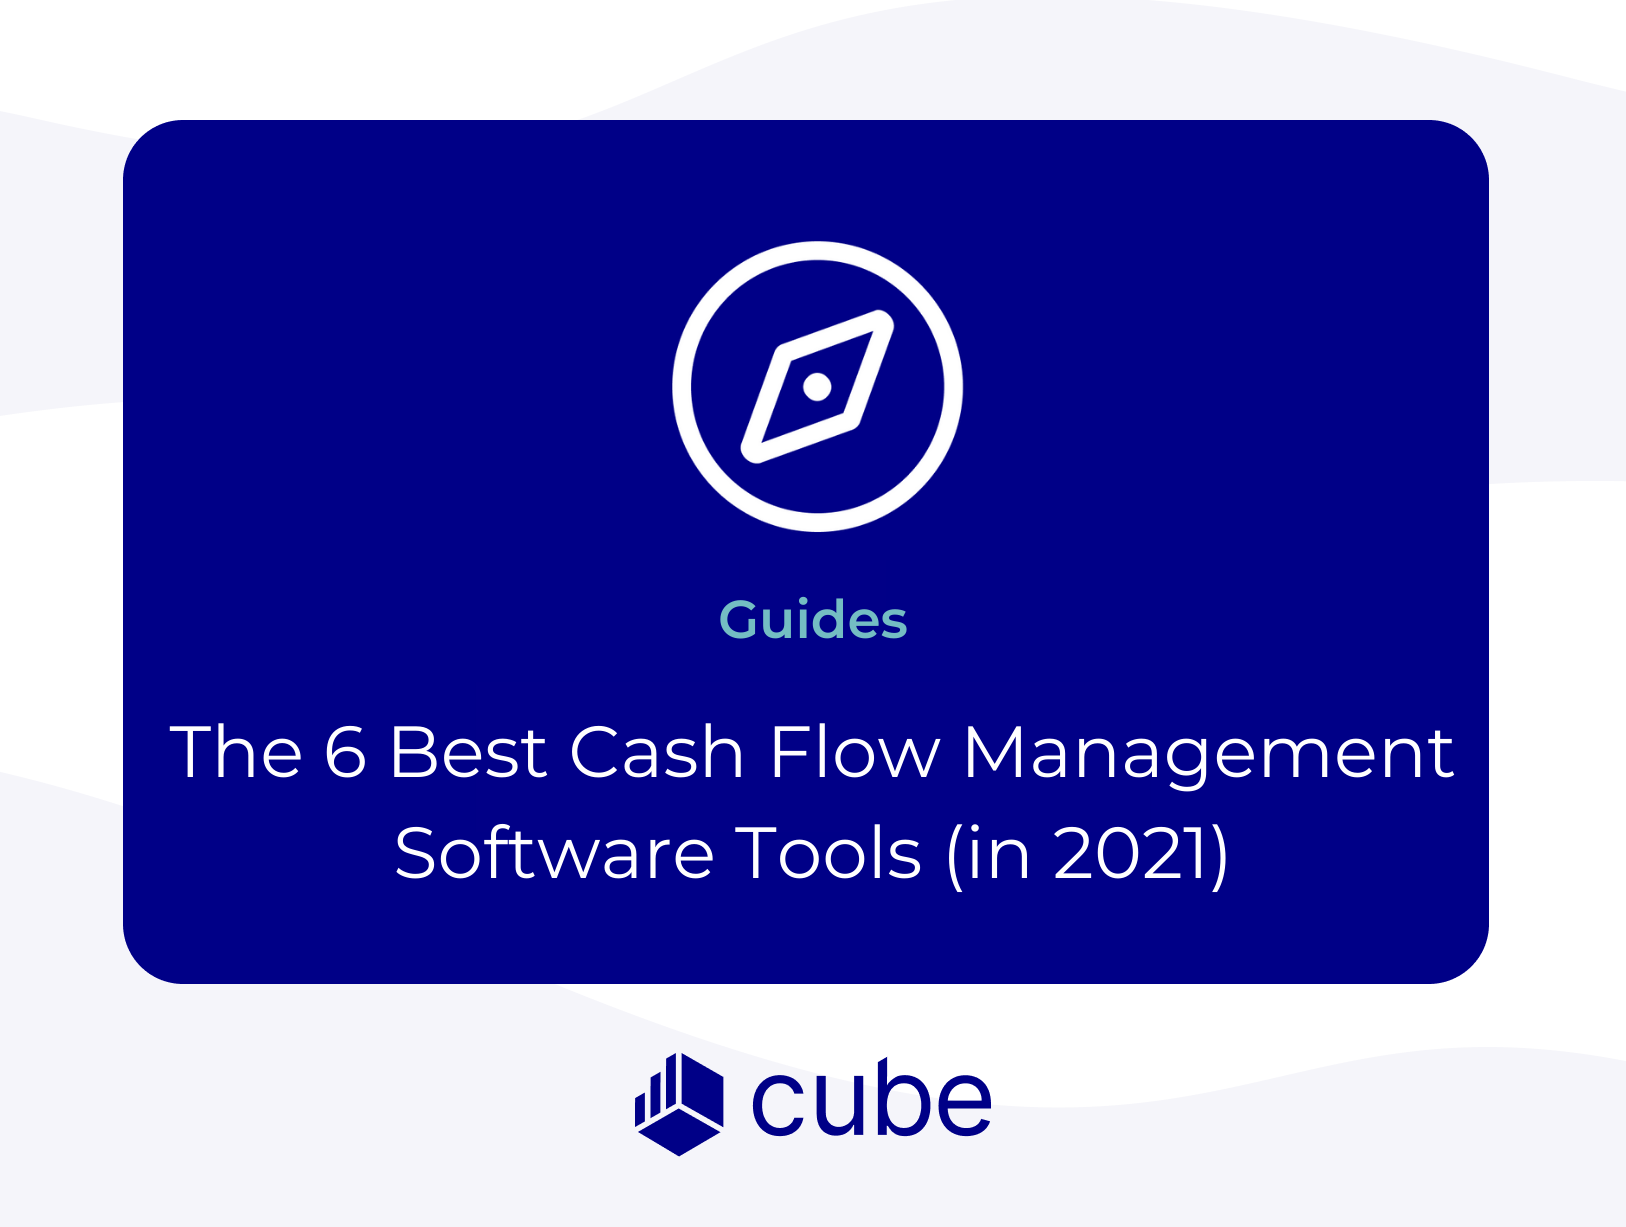 The 6 Best Cash Flow Management Software Tools in 2022